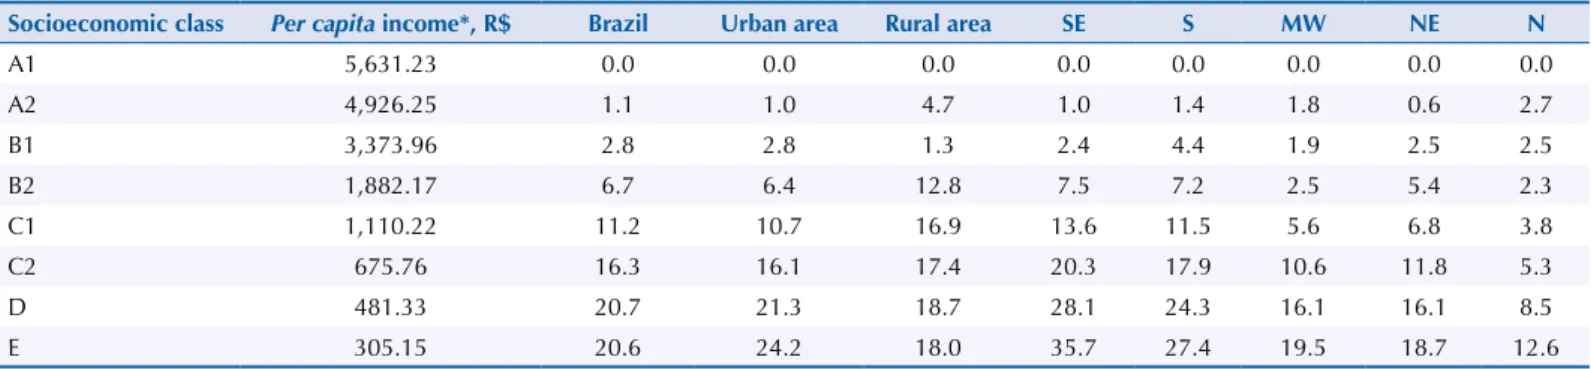 Table 1. Percentage of medicines provided by the Brazilian Unified Health System (SUS) in relation to the total number of medicines obtained,  per socioeconomic class, according to the 2008/2009 POF, at national level and Brazilian regions.